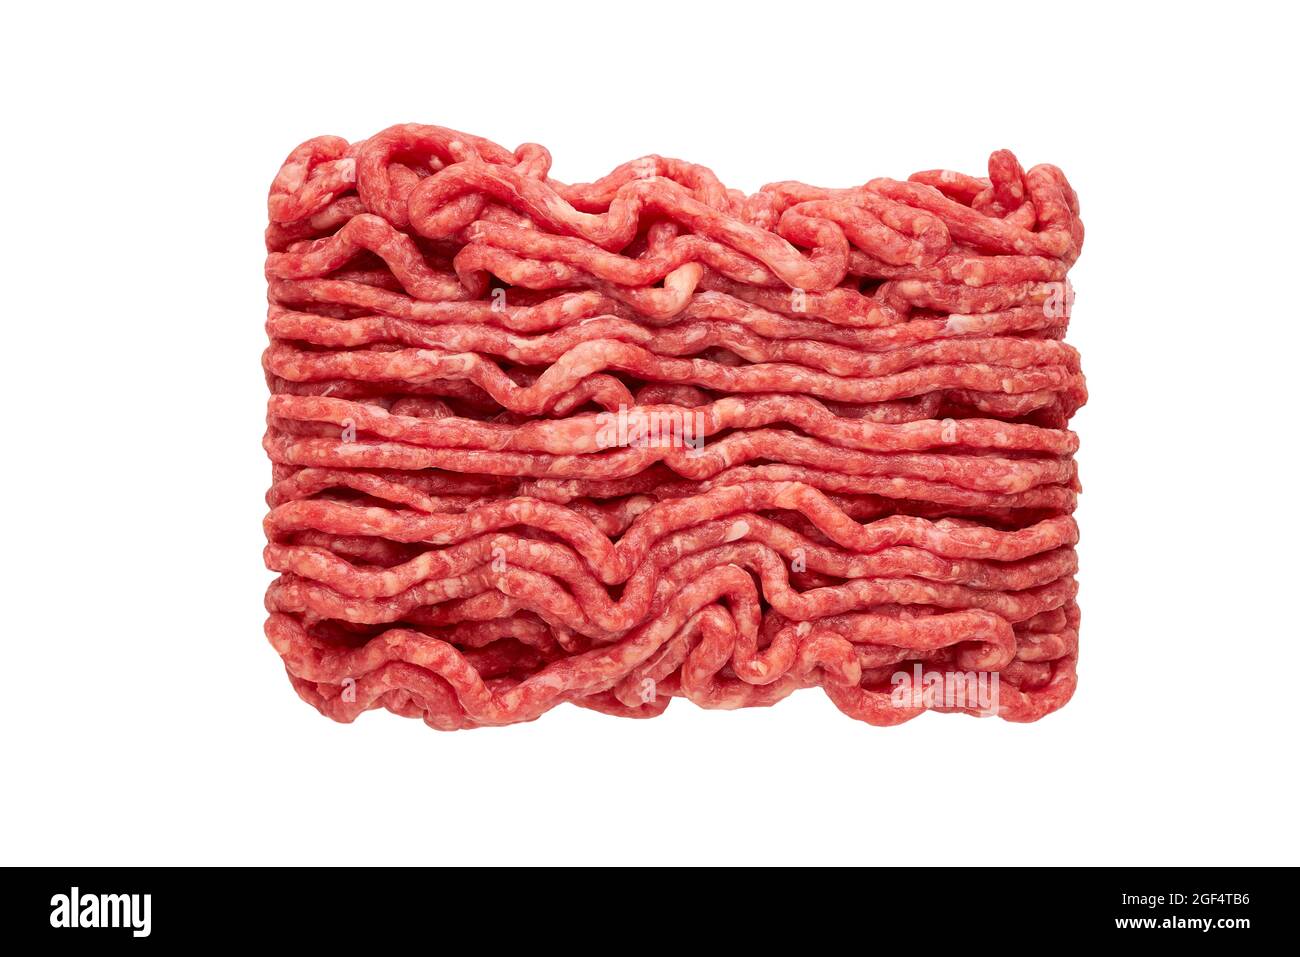 Raw ground beef, minced beef or beef mince isolated over white background. Top view Stock Photo